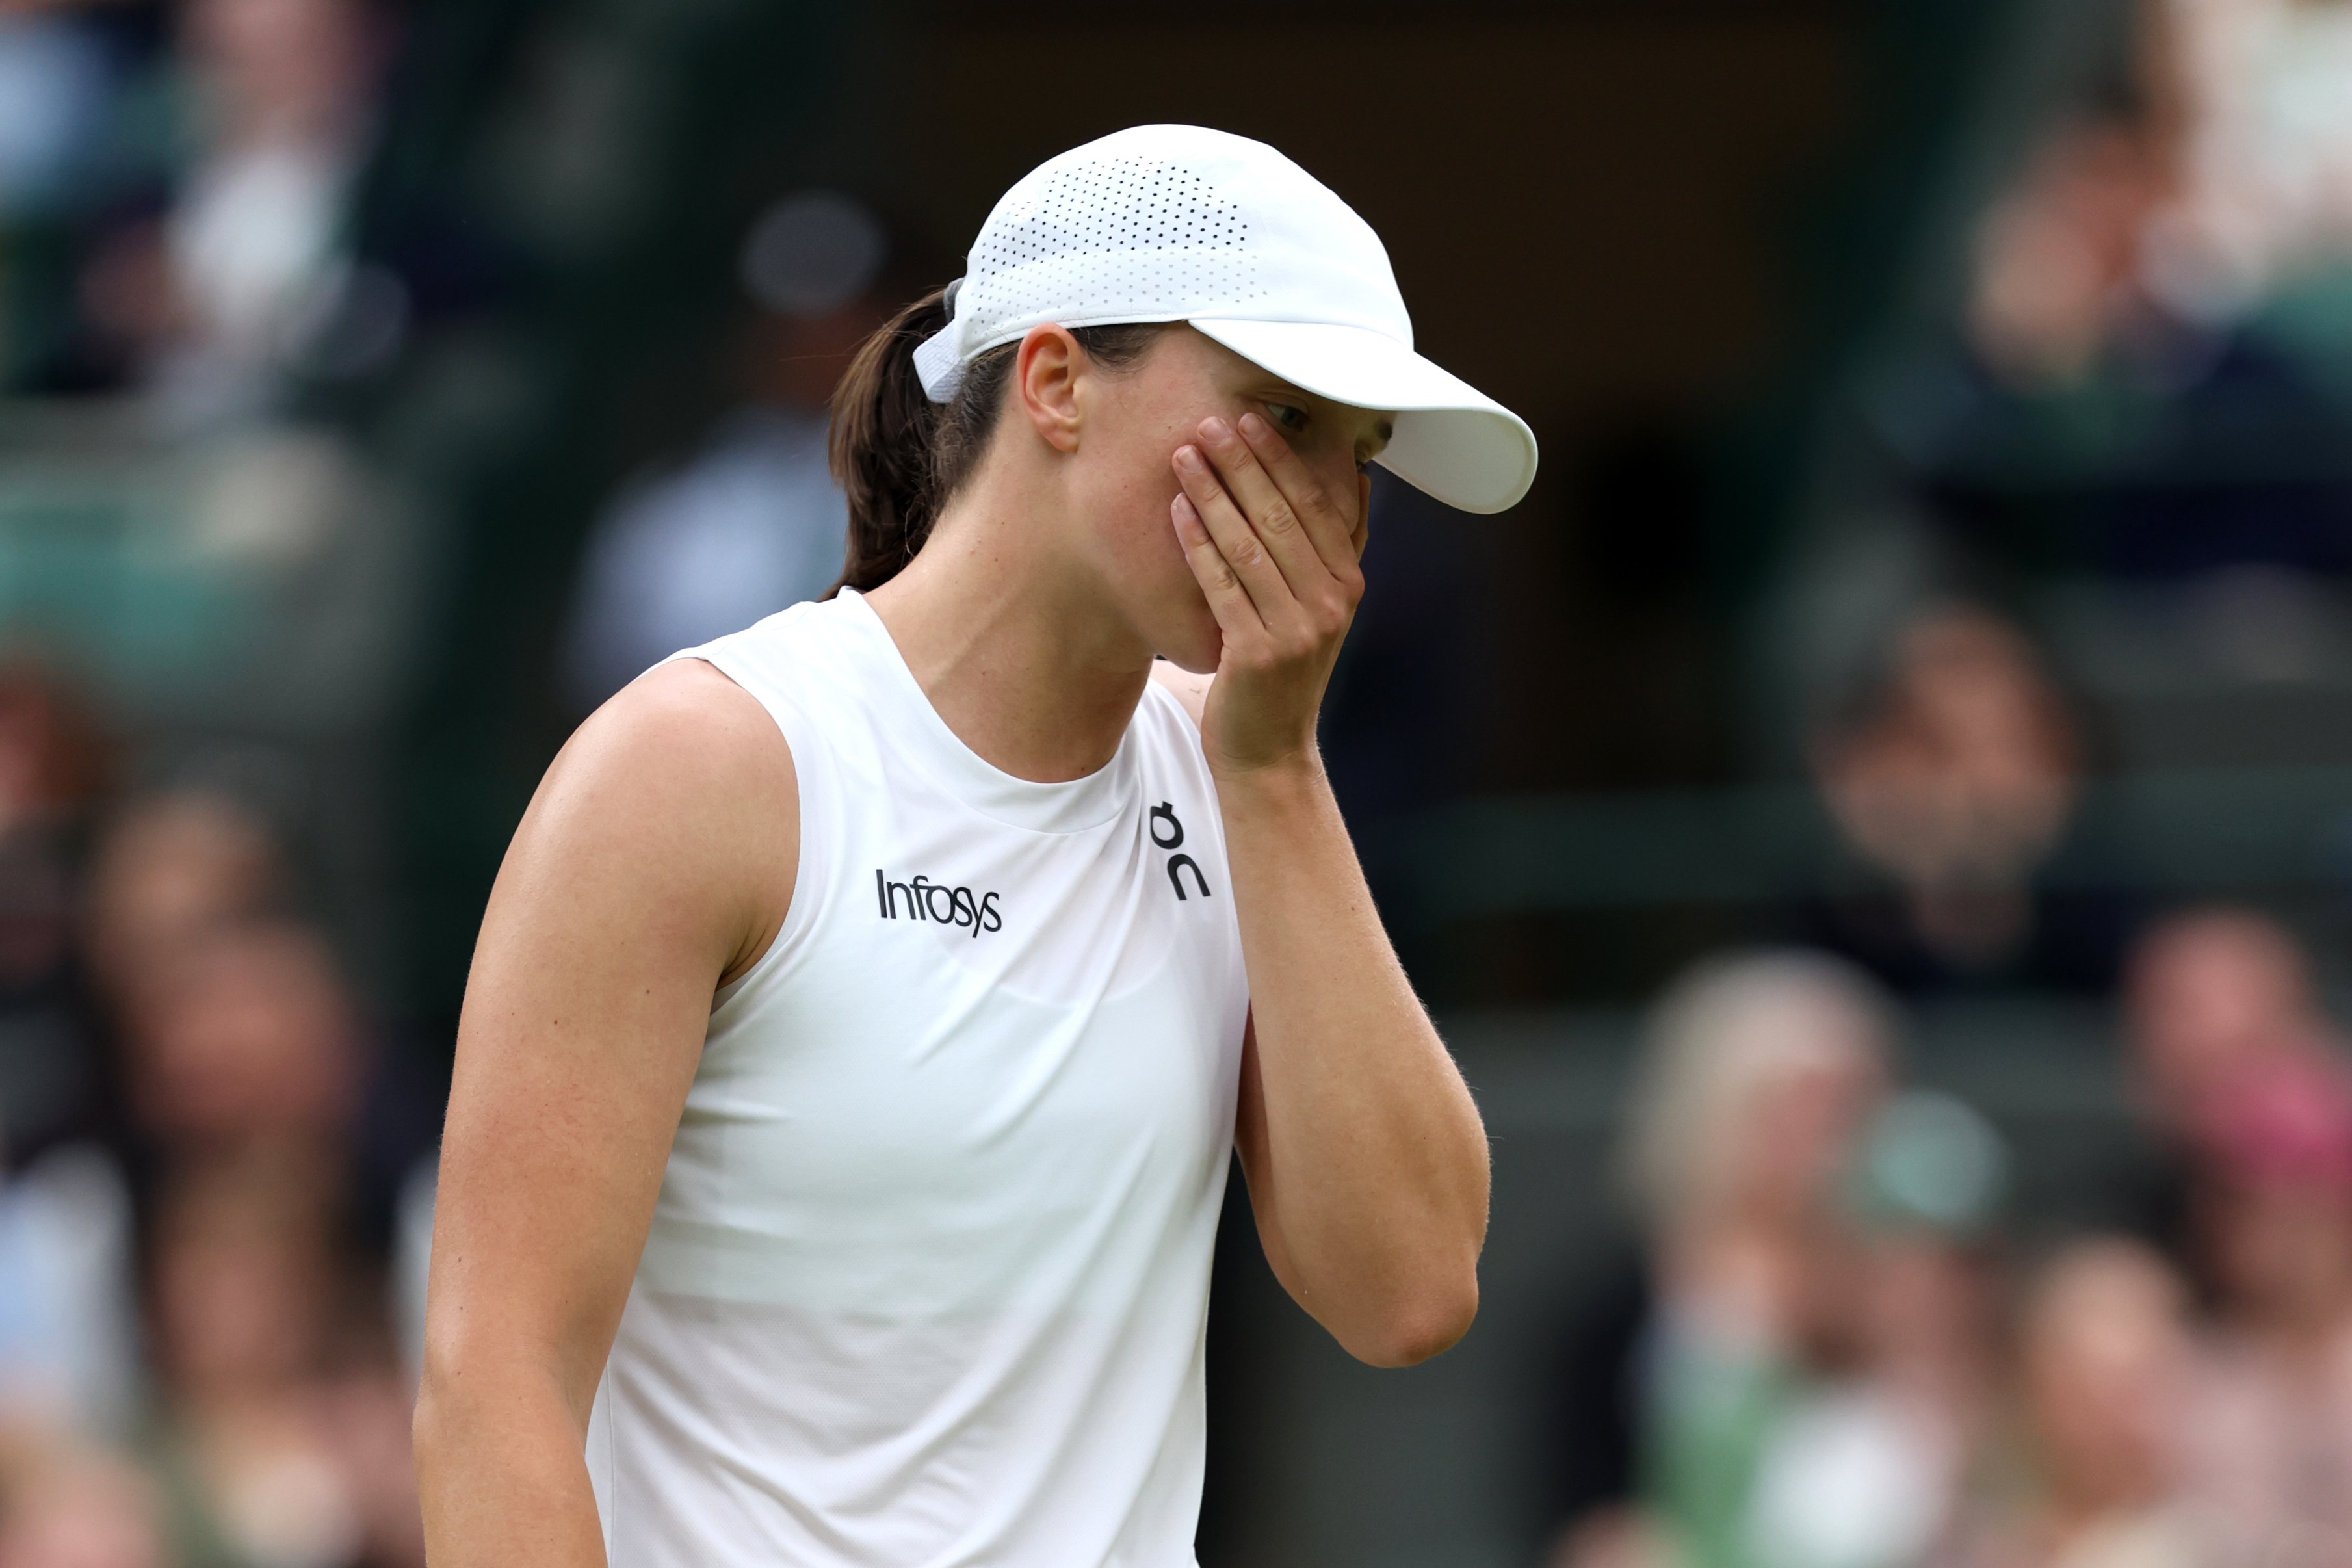 Iga Swiatek reacts during her loss to Yulia Putintseva in the third round of Wimbledon on Saturday in London. (Photo by Clive Brunskill/Getty Images)